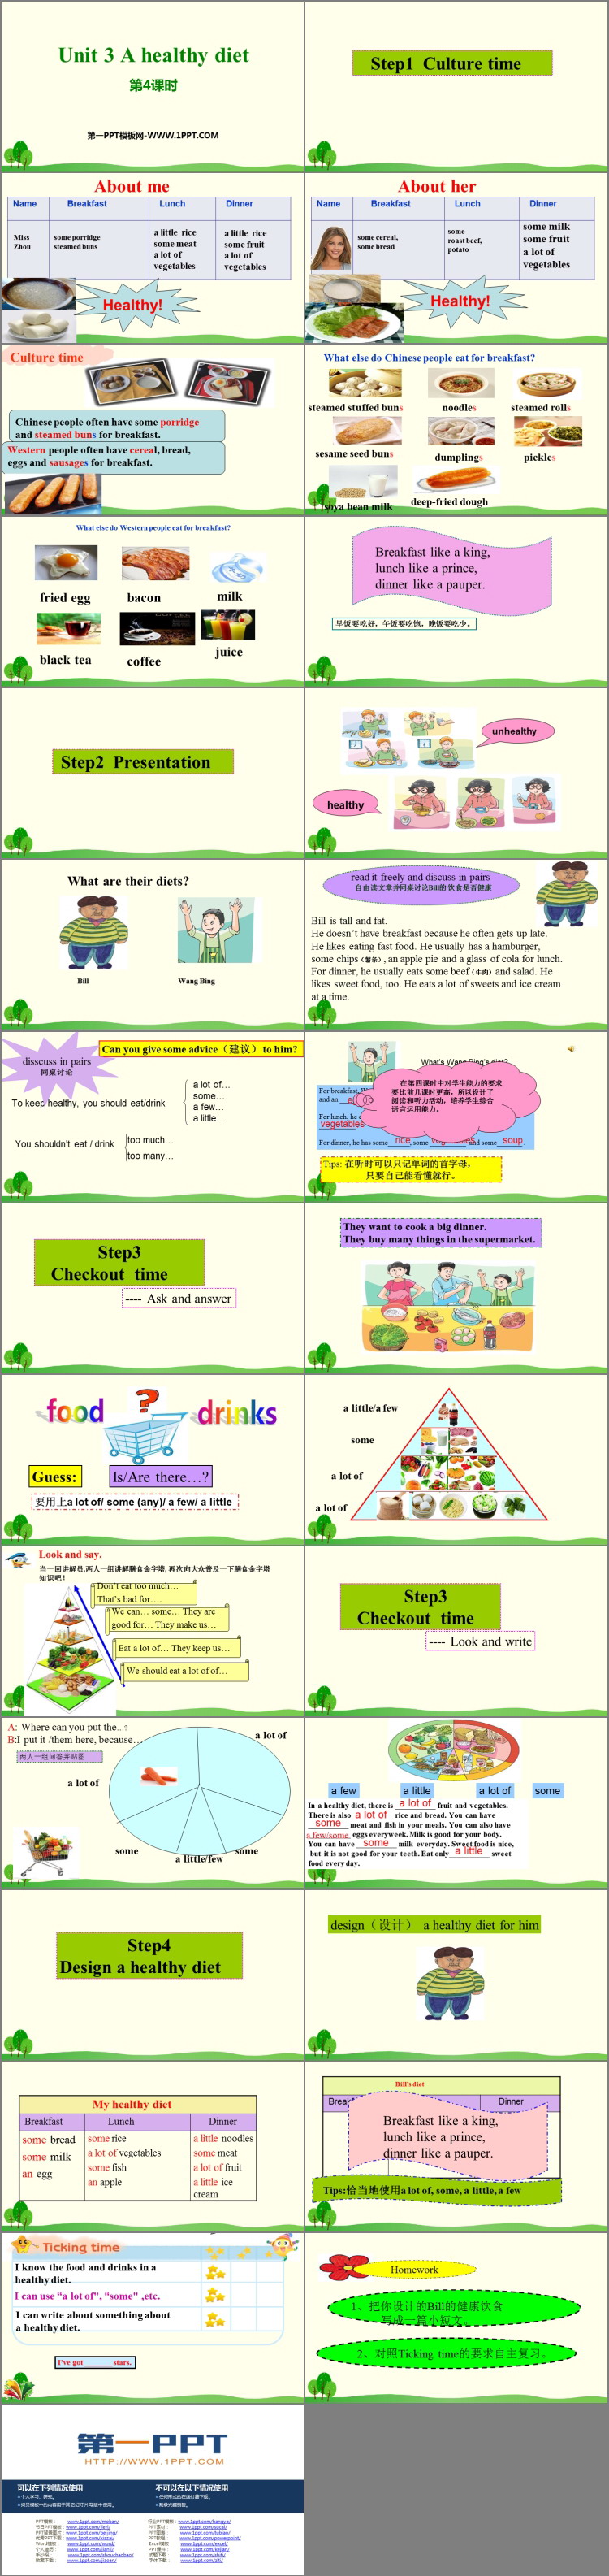 《A healthy diet》PPT(第4课时)